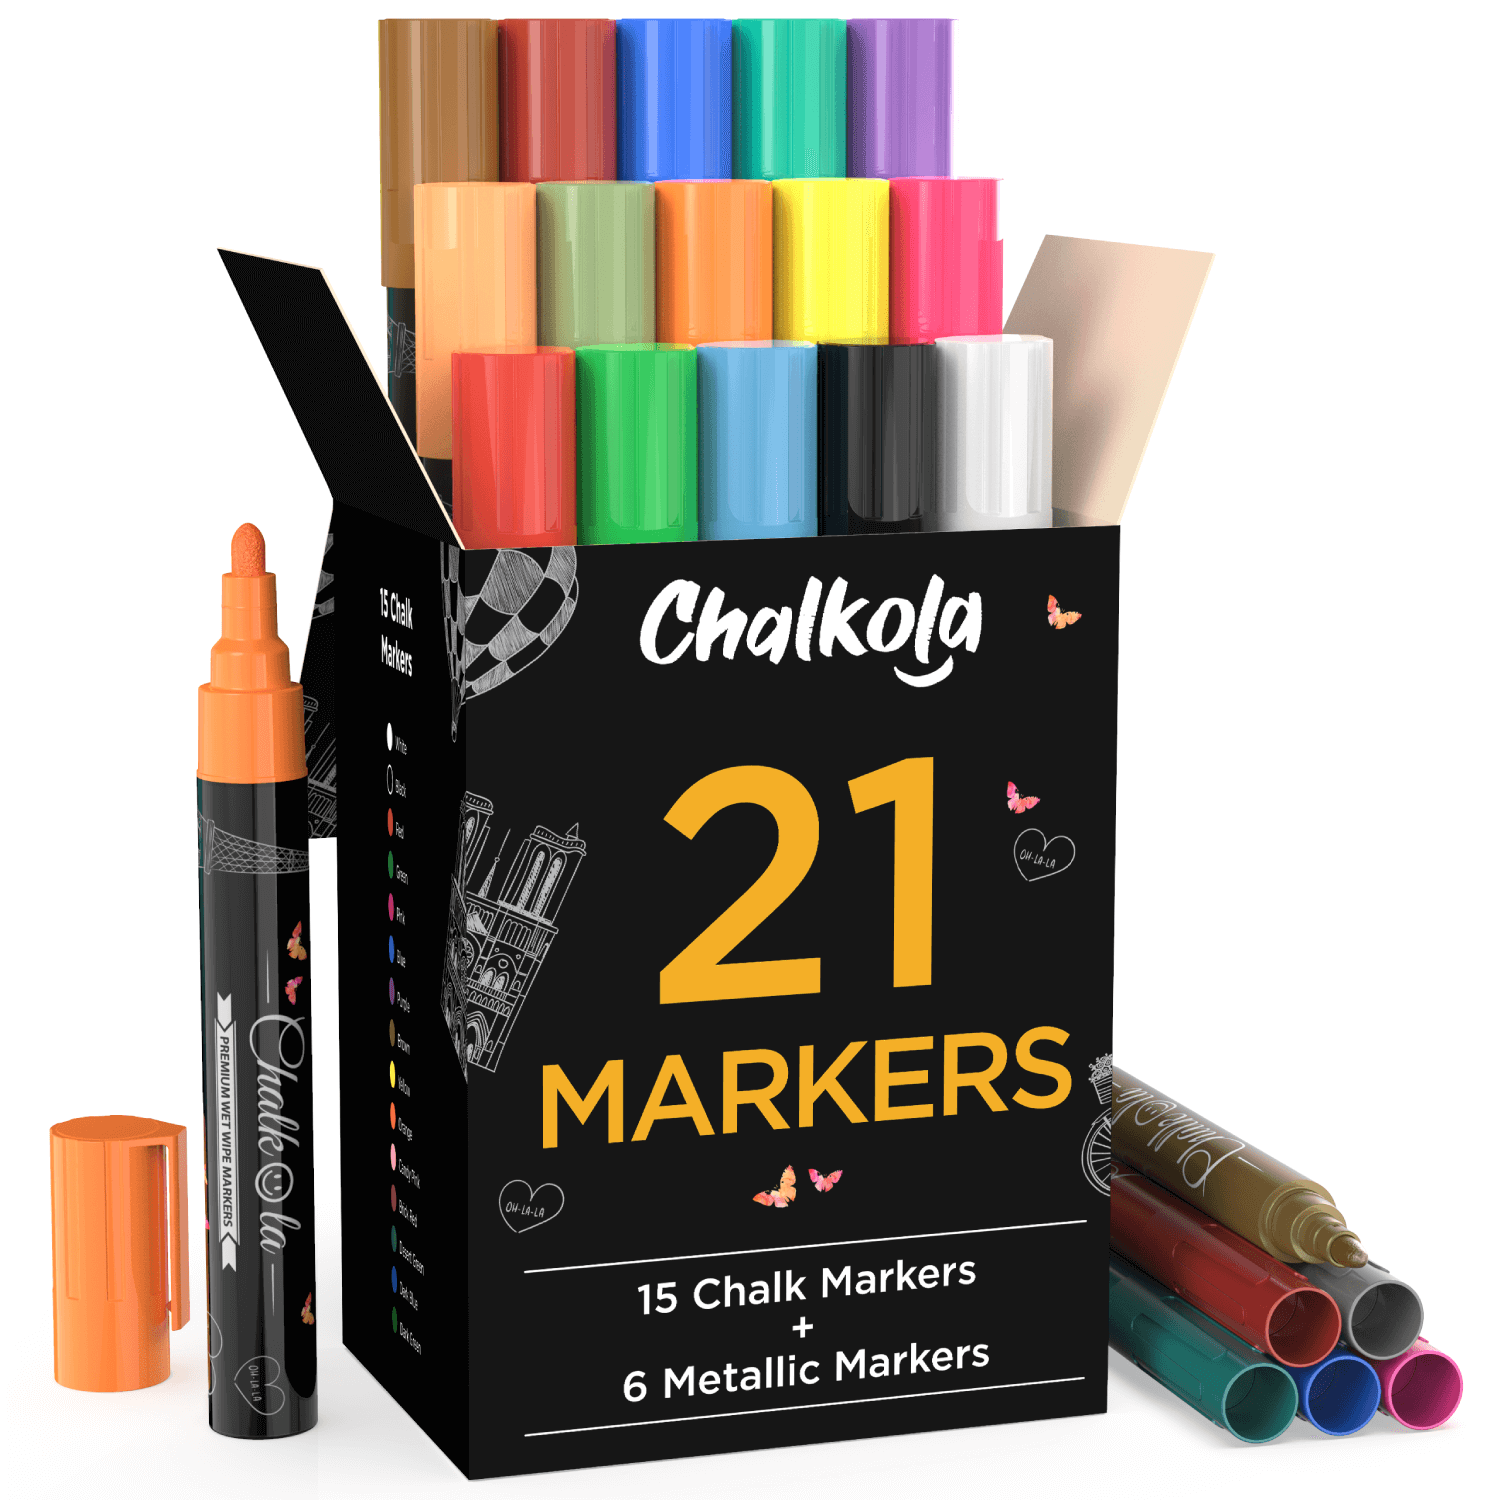 Cosco Chalk Marker, White, Green, Blue, Yellow, 4-Pack